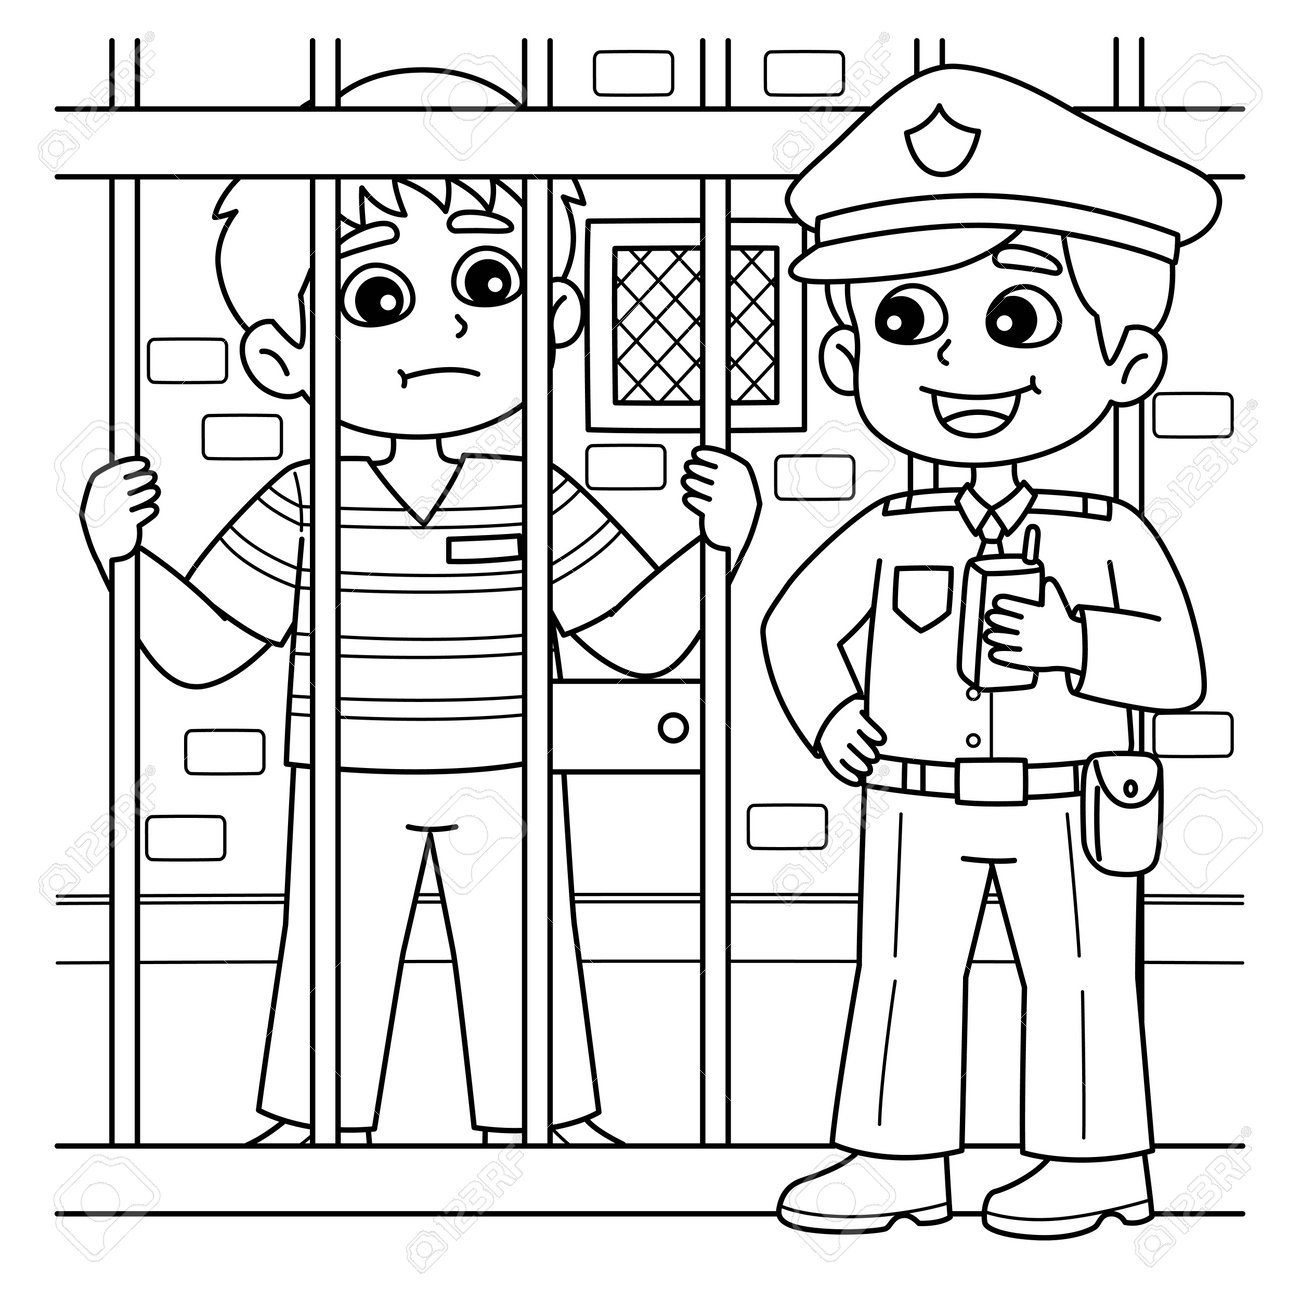 Police man and prisoner coloring page for kids royalty free svg cliparts vectors and stock illustration image